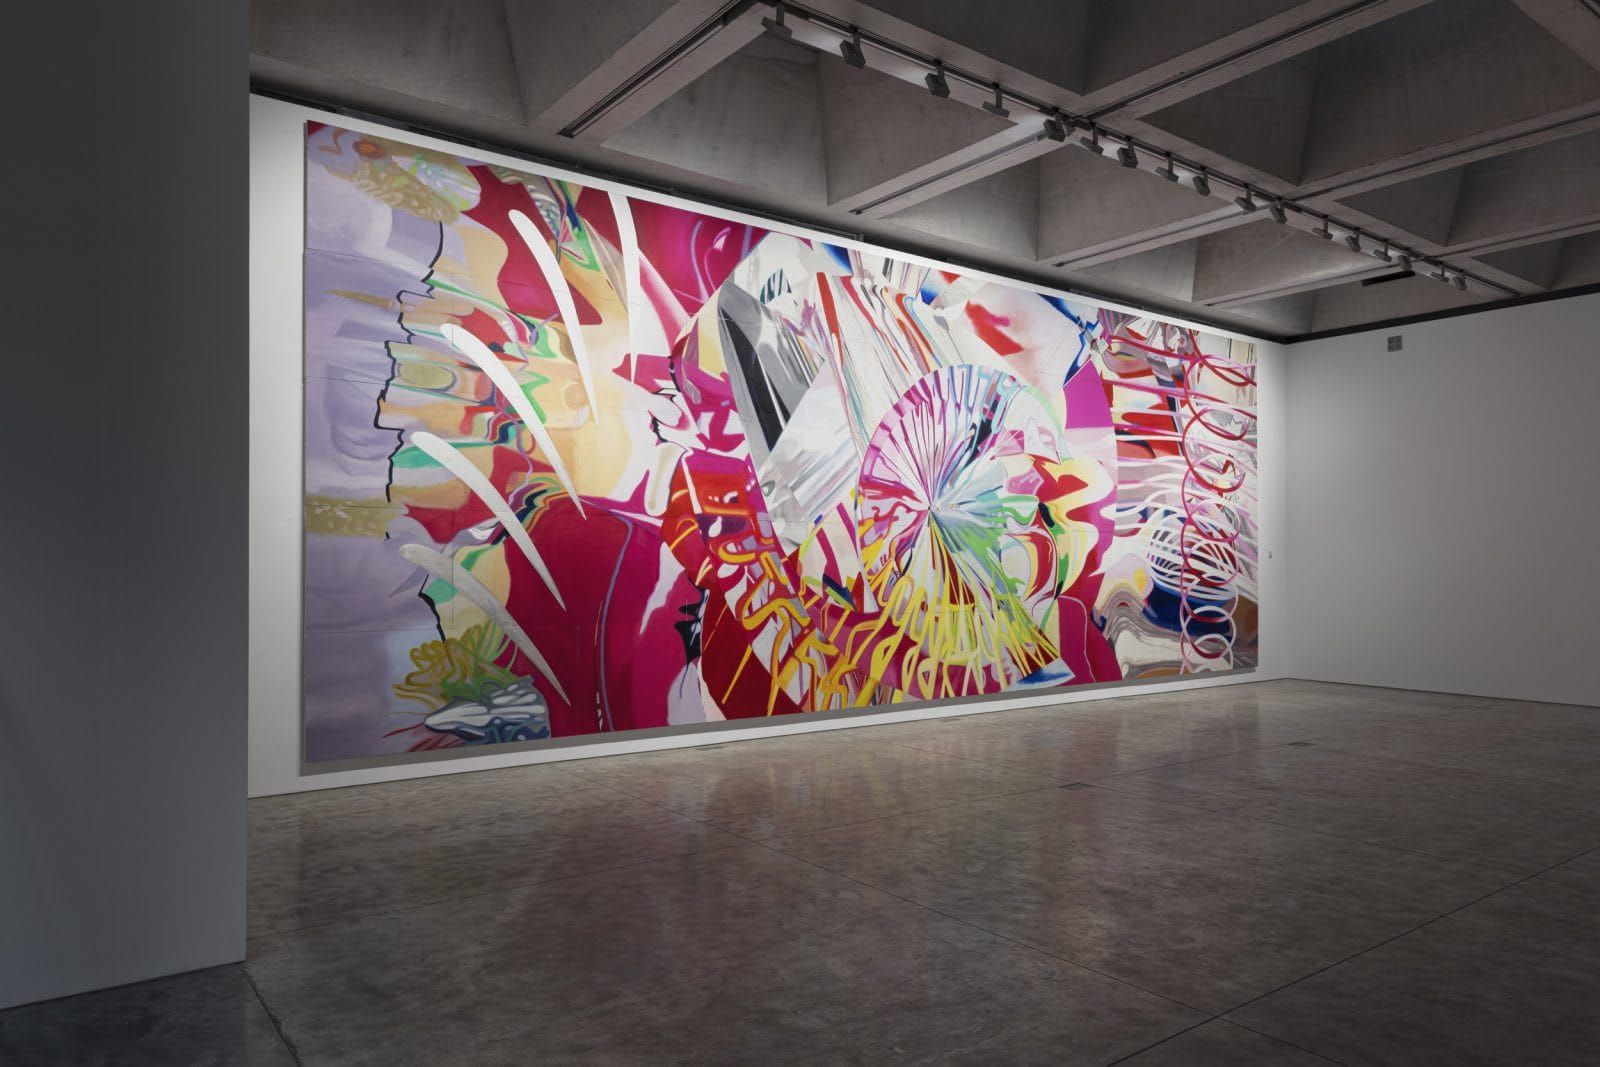 Installation of Two Paintings at Kasmin, 2019 © 2021 James Rosenquist, Inc. / Licensed by Artists Rights Society (ARS), NY. Used by permission. All rights reserved. Photography by Christopher Stach.